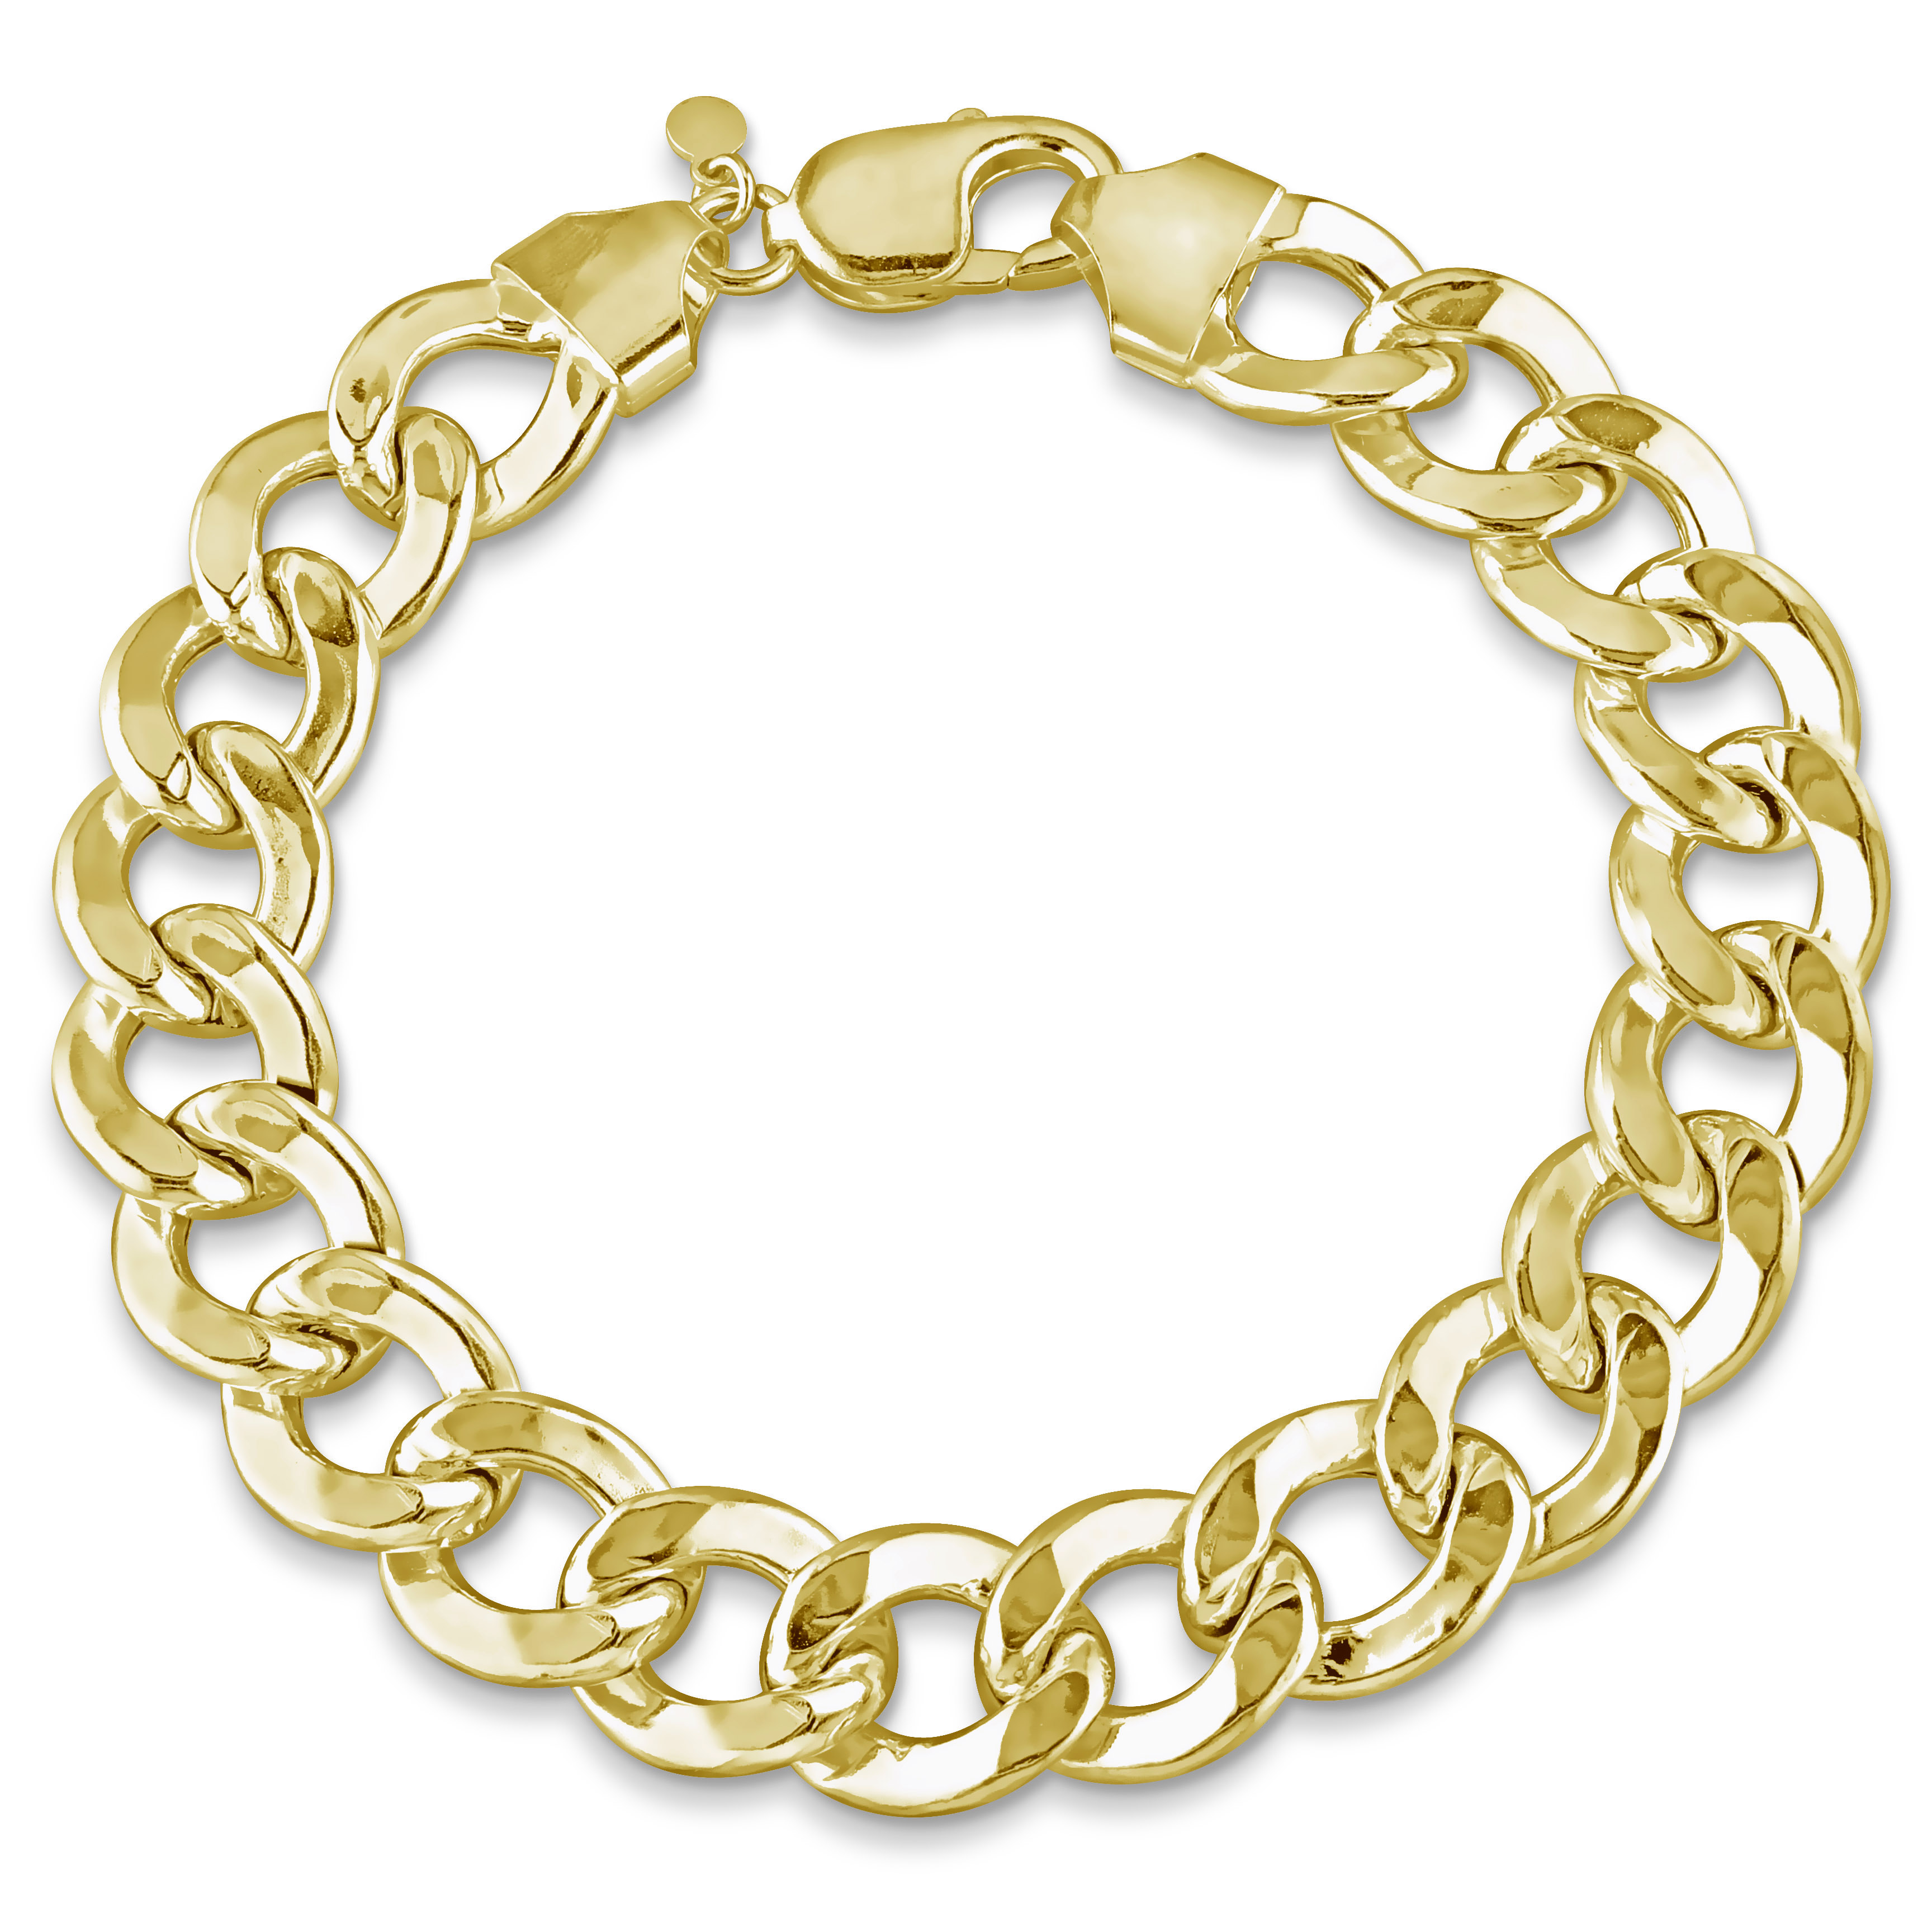 12.5mm Curb Link Bracelet in 18k Yellow Gold Plated Sterling Silver - 9 in.